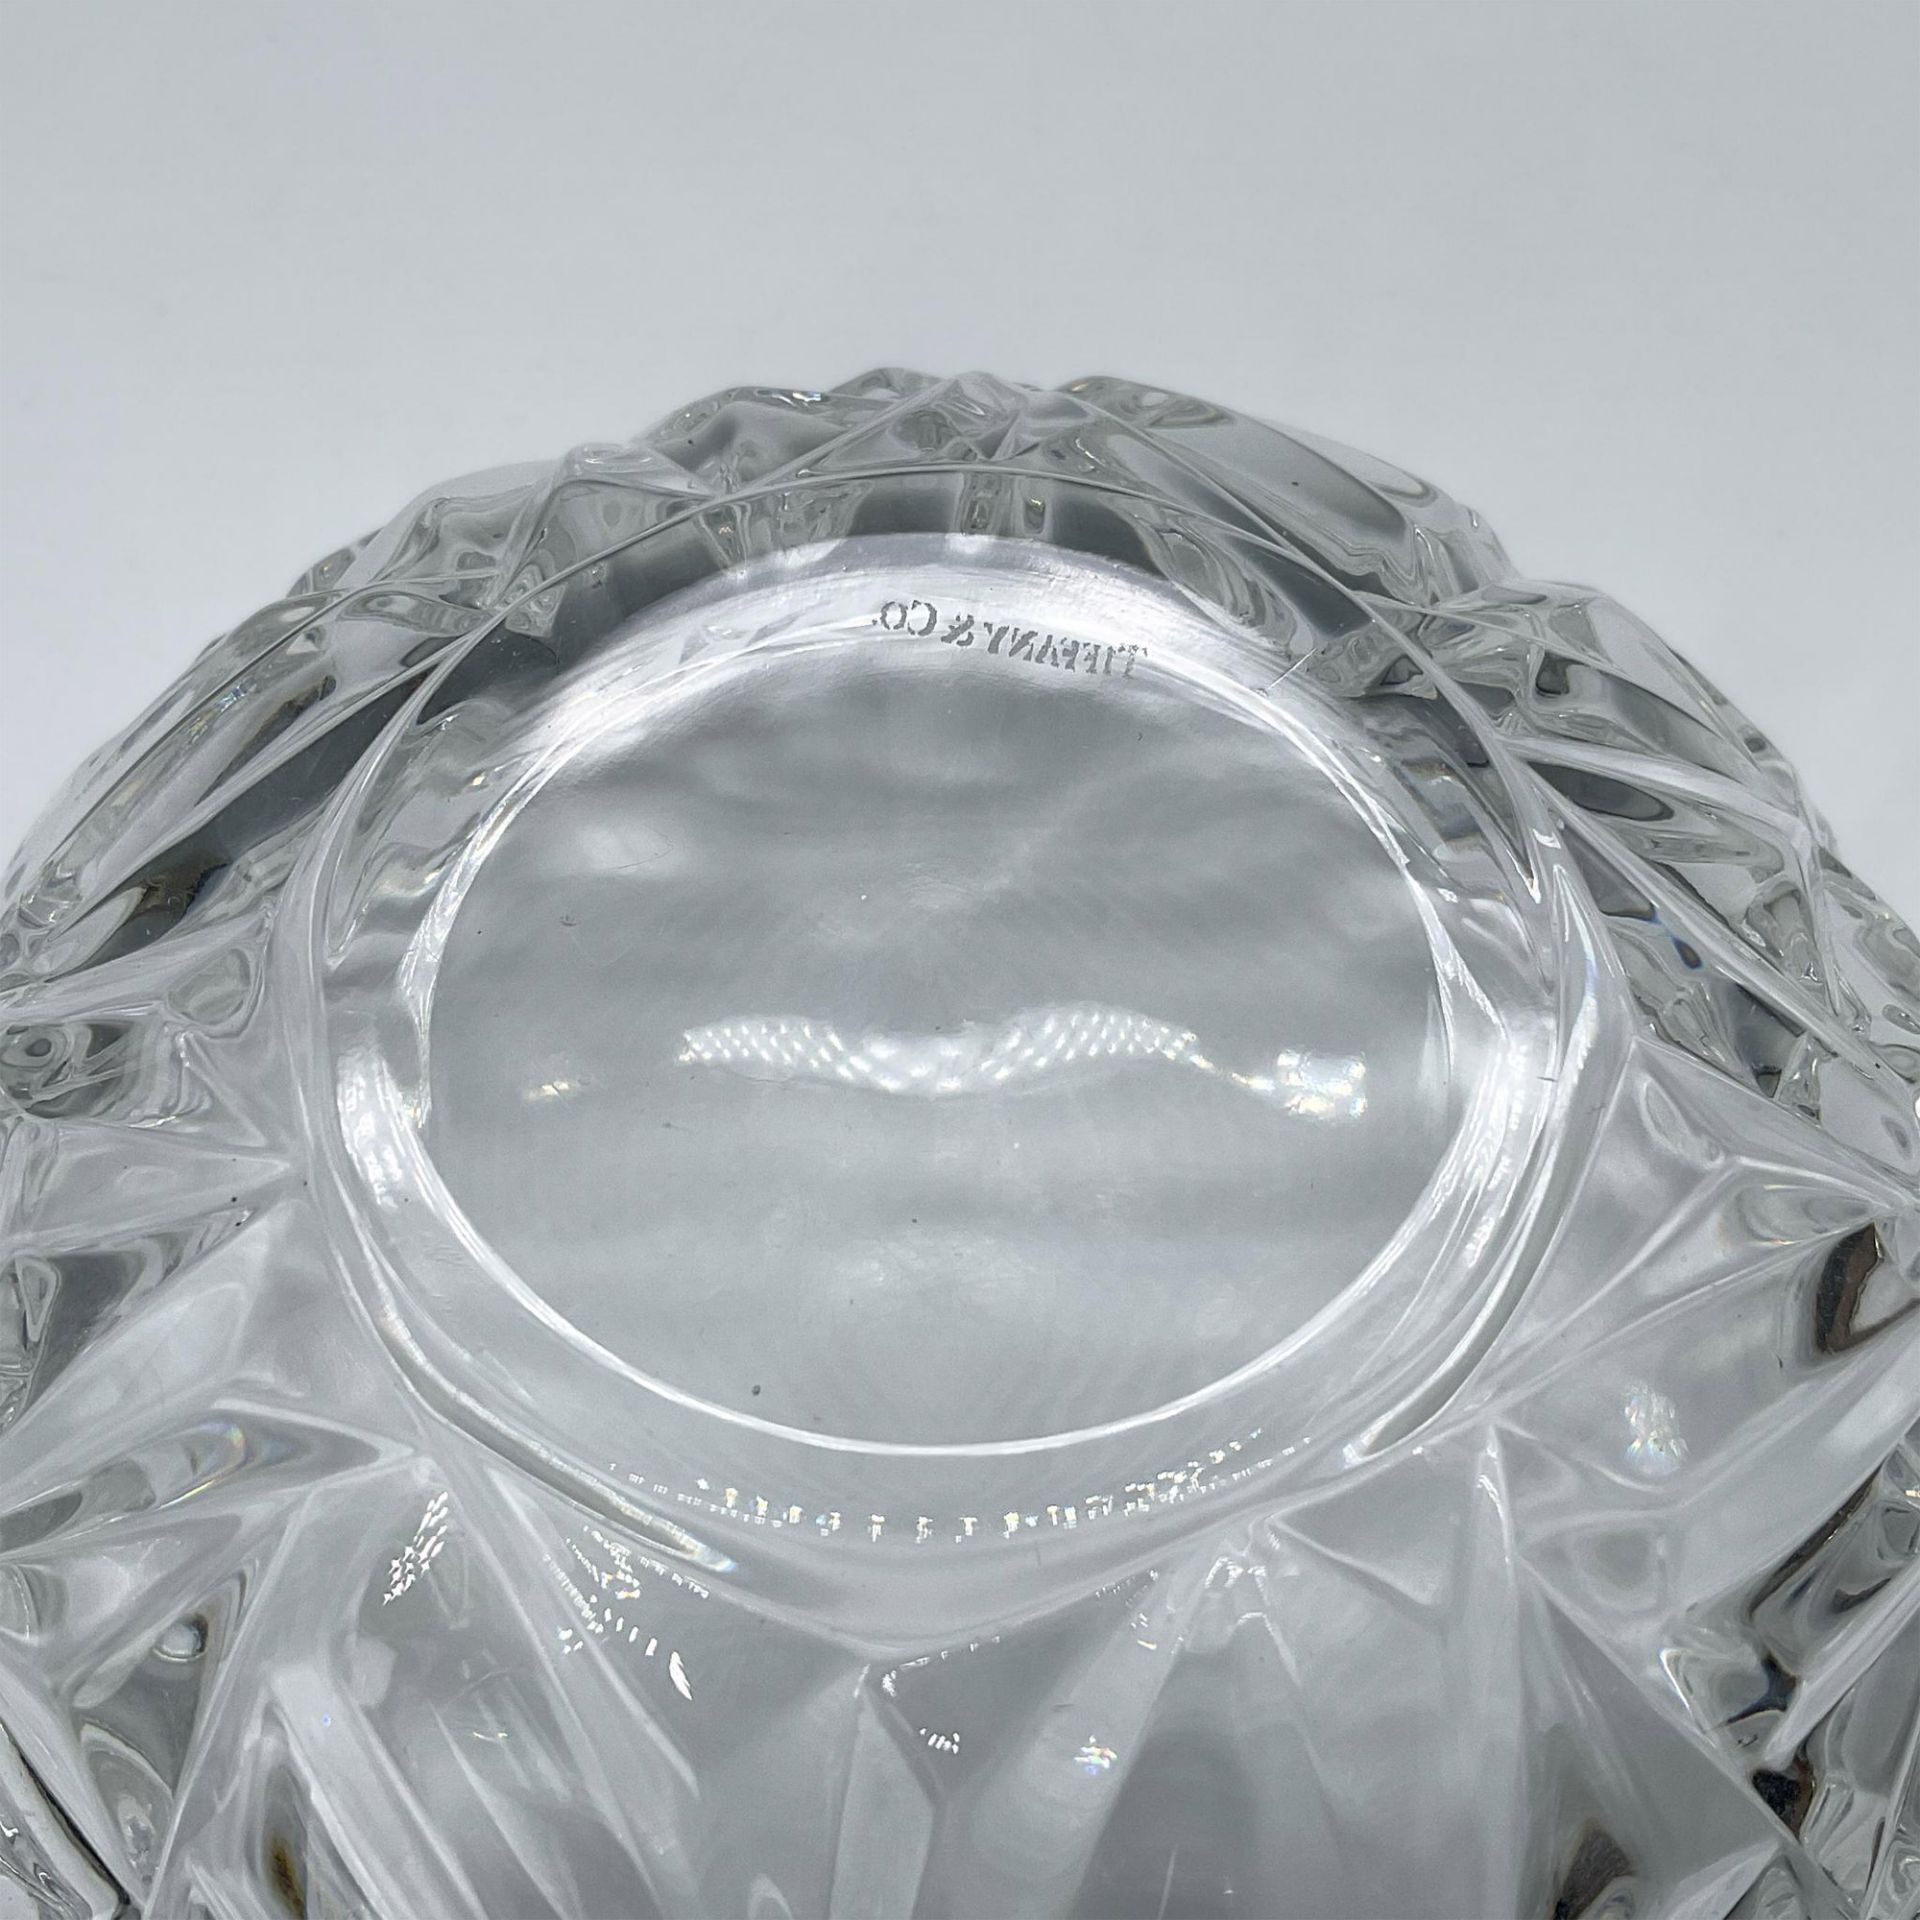 Tiffany and Co, Rock Cut Crystal Bowl - Image 4 of 4